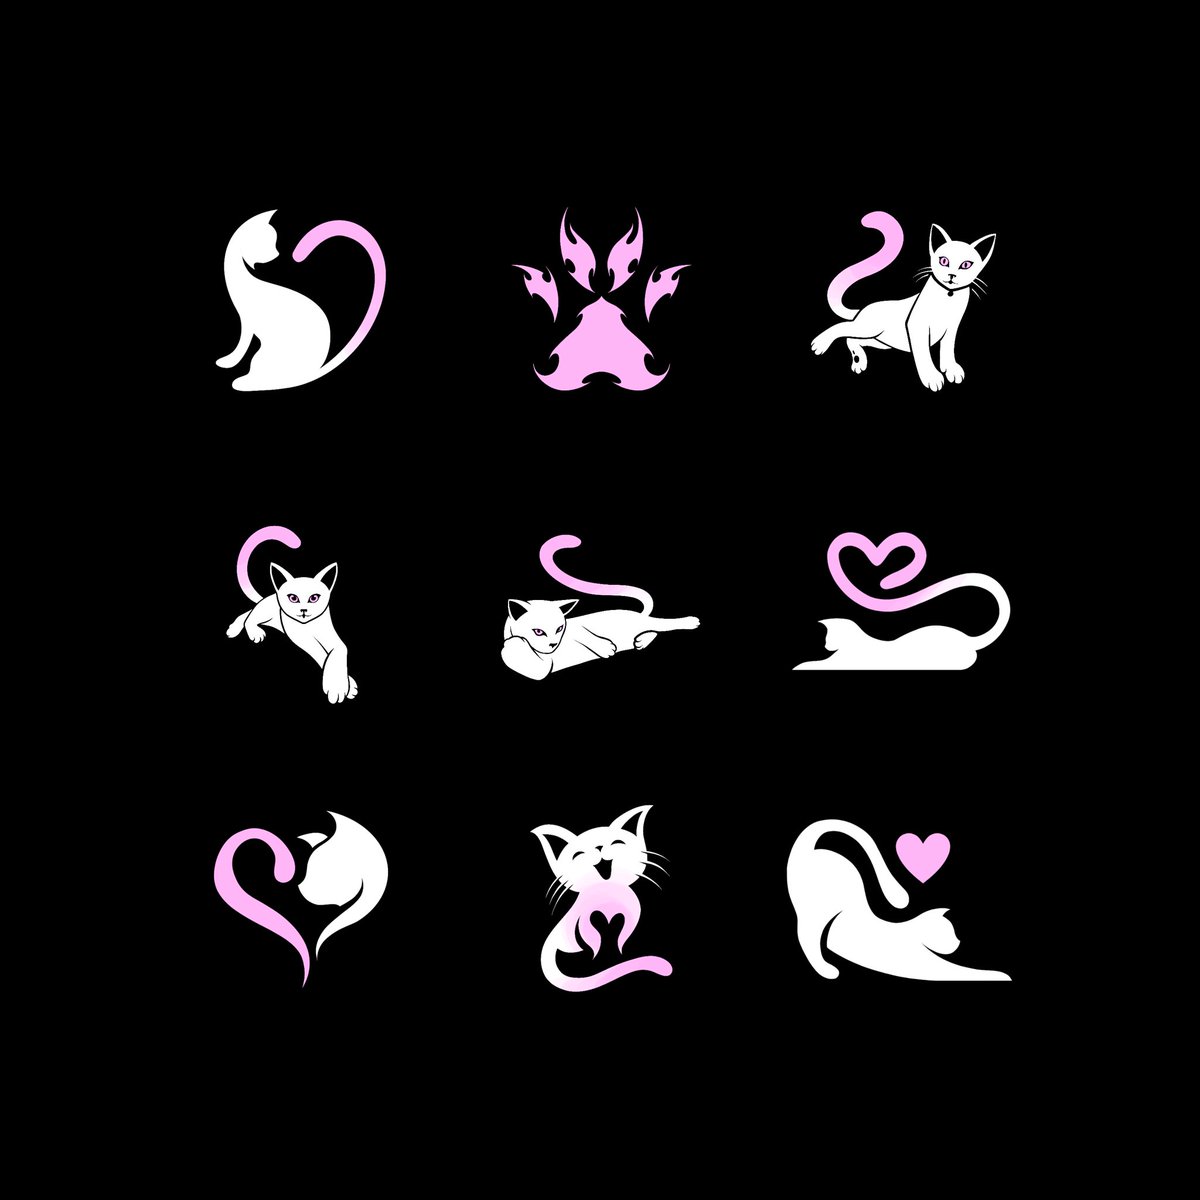 READ PLEASE ! ! ! my cat days ago had surgery but i don't have enough money. i'm trying to sell these cat themed premade logos i recently made to save money to pay the vet bill. PLEASE REPOST THIS FOR ME, WILL APPRECIATE A LOT if you want to donate: bit.ly/deathdonations 🙏🏻🤍